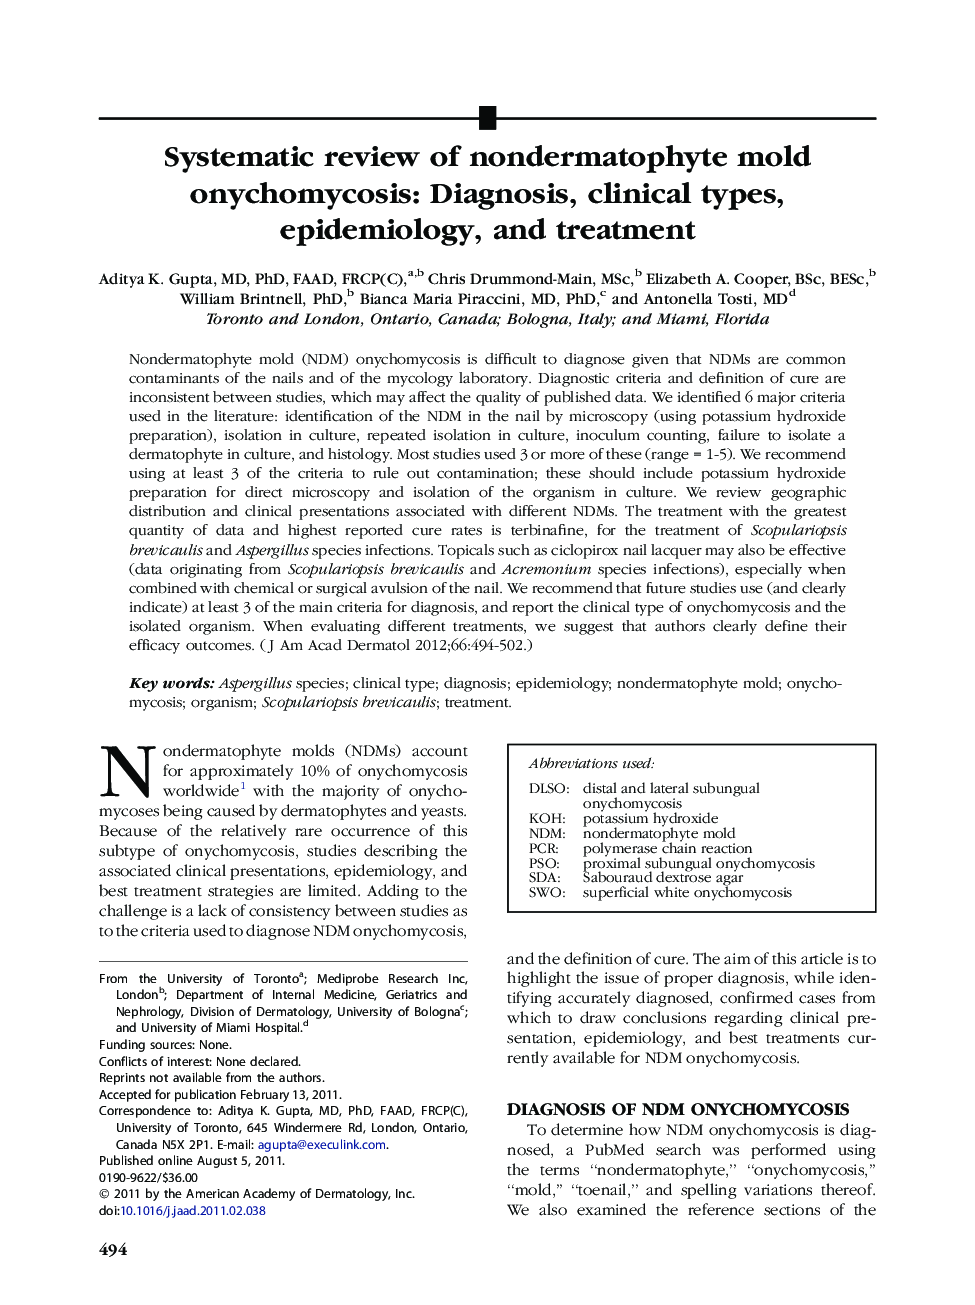 Systematic review of nondermatophyte mold onychomycosis: Diagnosis, clinical types, epidemiology, and treatment 